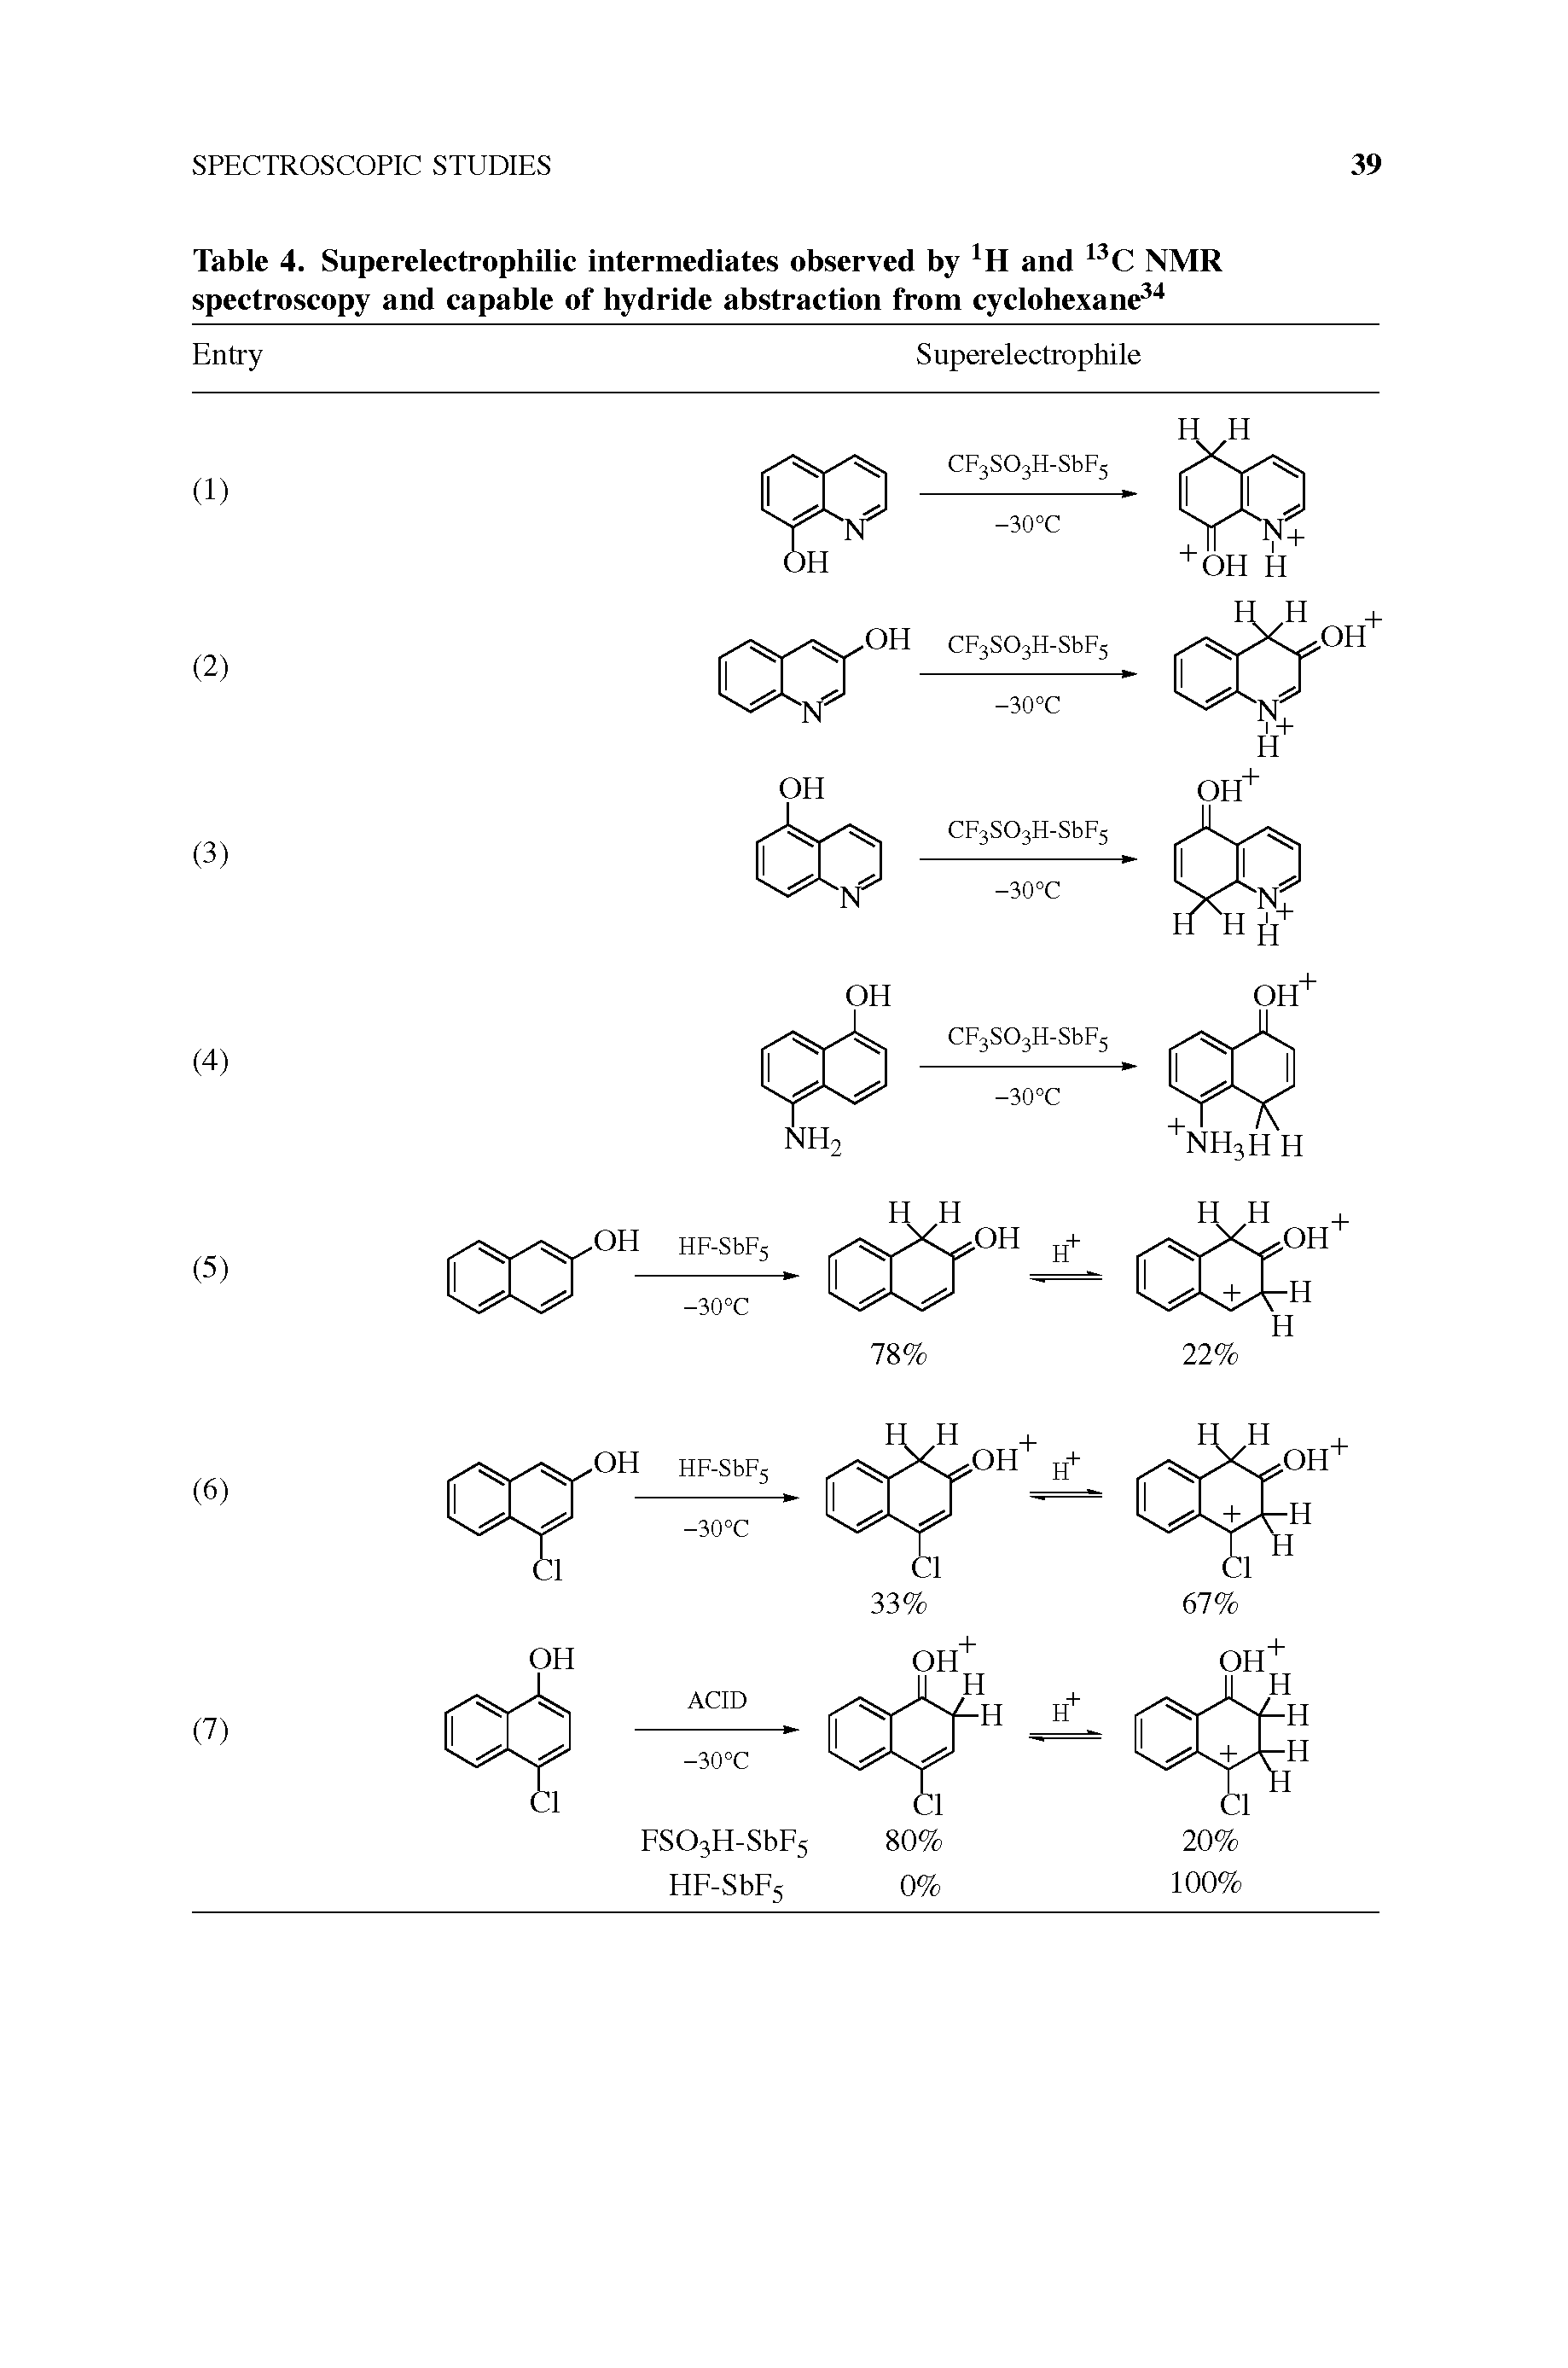 Table 4. Superelectrophilic intermediates observed by ll and 13C NMR spectroscopy and capable of hydride abstraction from cyclohexane34...